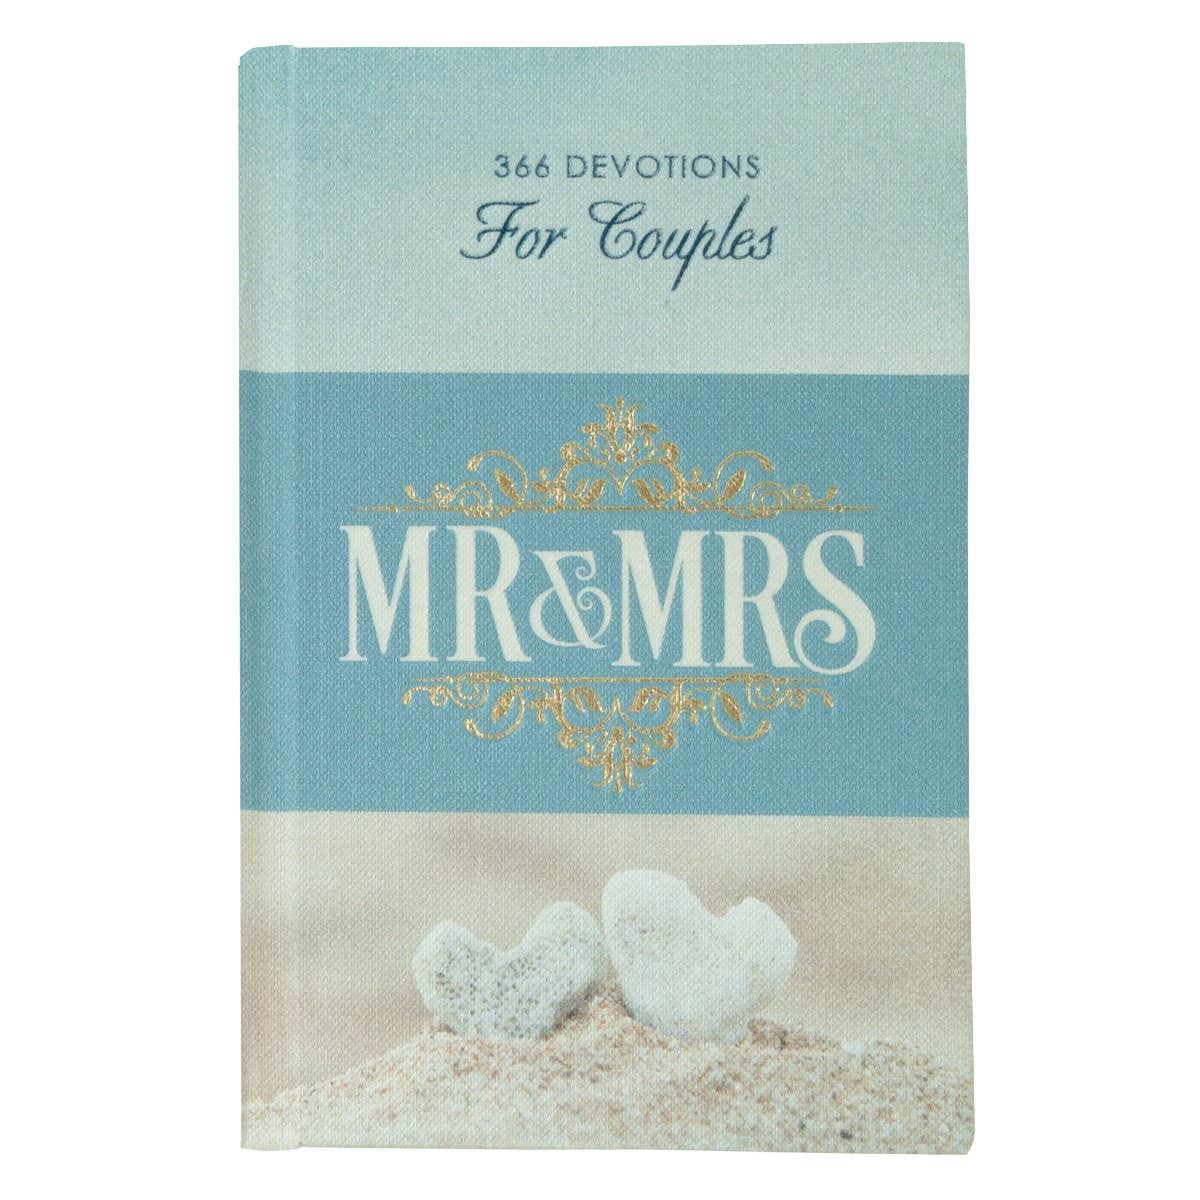 Mr. and Mrs. 366 Devotions for Couples Hardcover Edition